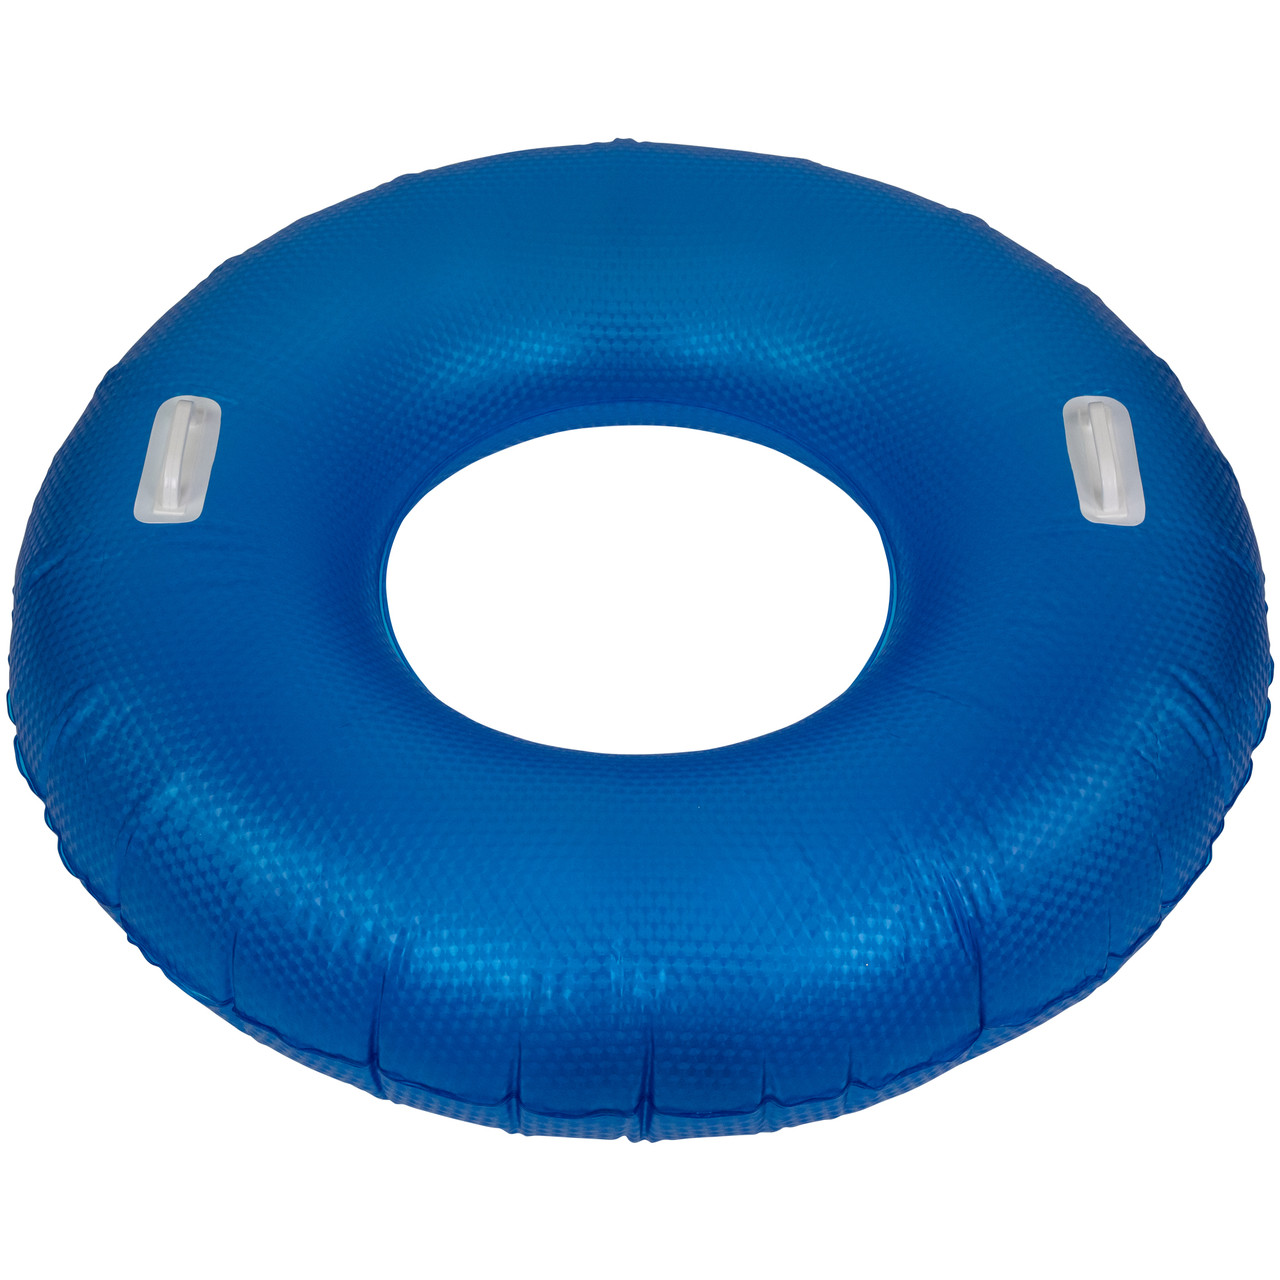 Amazon.com: Swimming Ring,Ocean Cartoon PVC Swim Ring,Summer Swimming Pool  Float Loungers Tube,Inflatable Durable Round Swimming Float Tube, Suitable  Kidsteen Waterfun Beach Party Toy,1 : Toys & Games